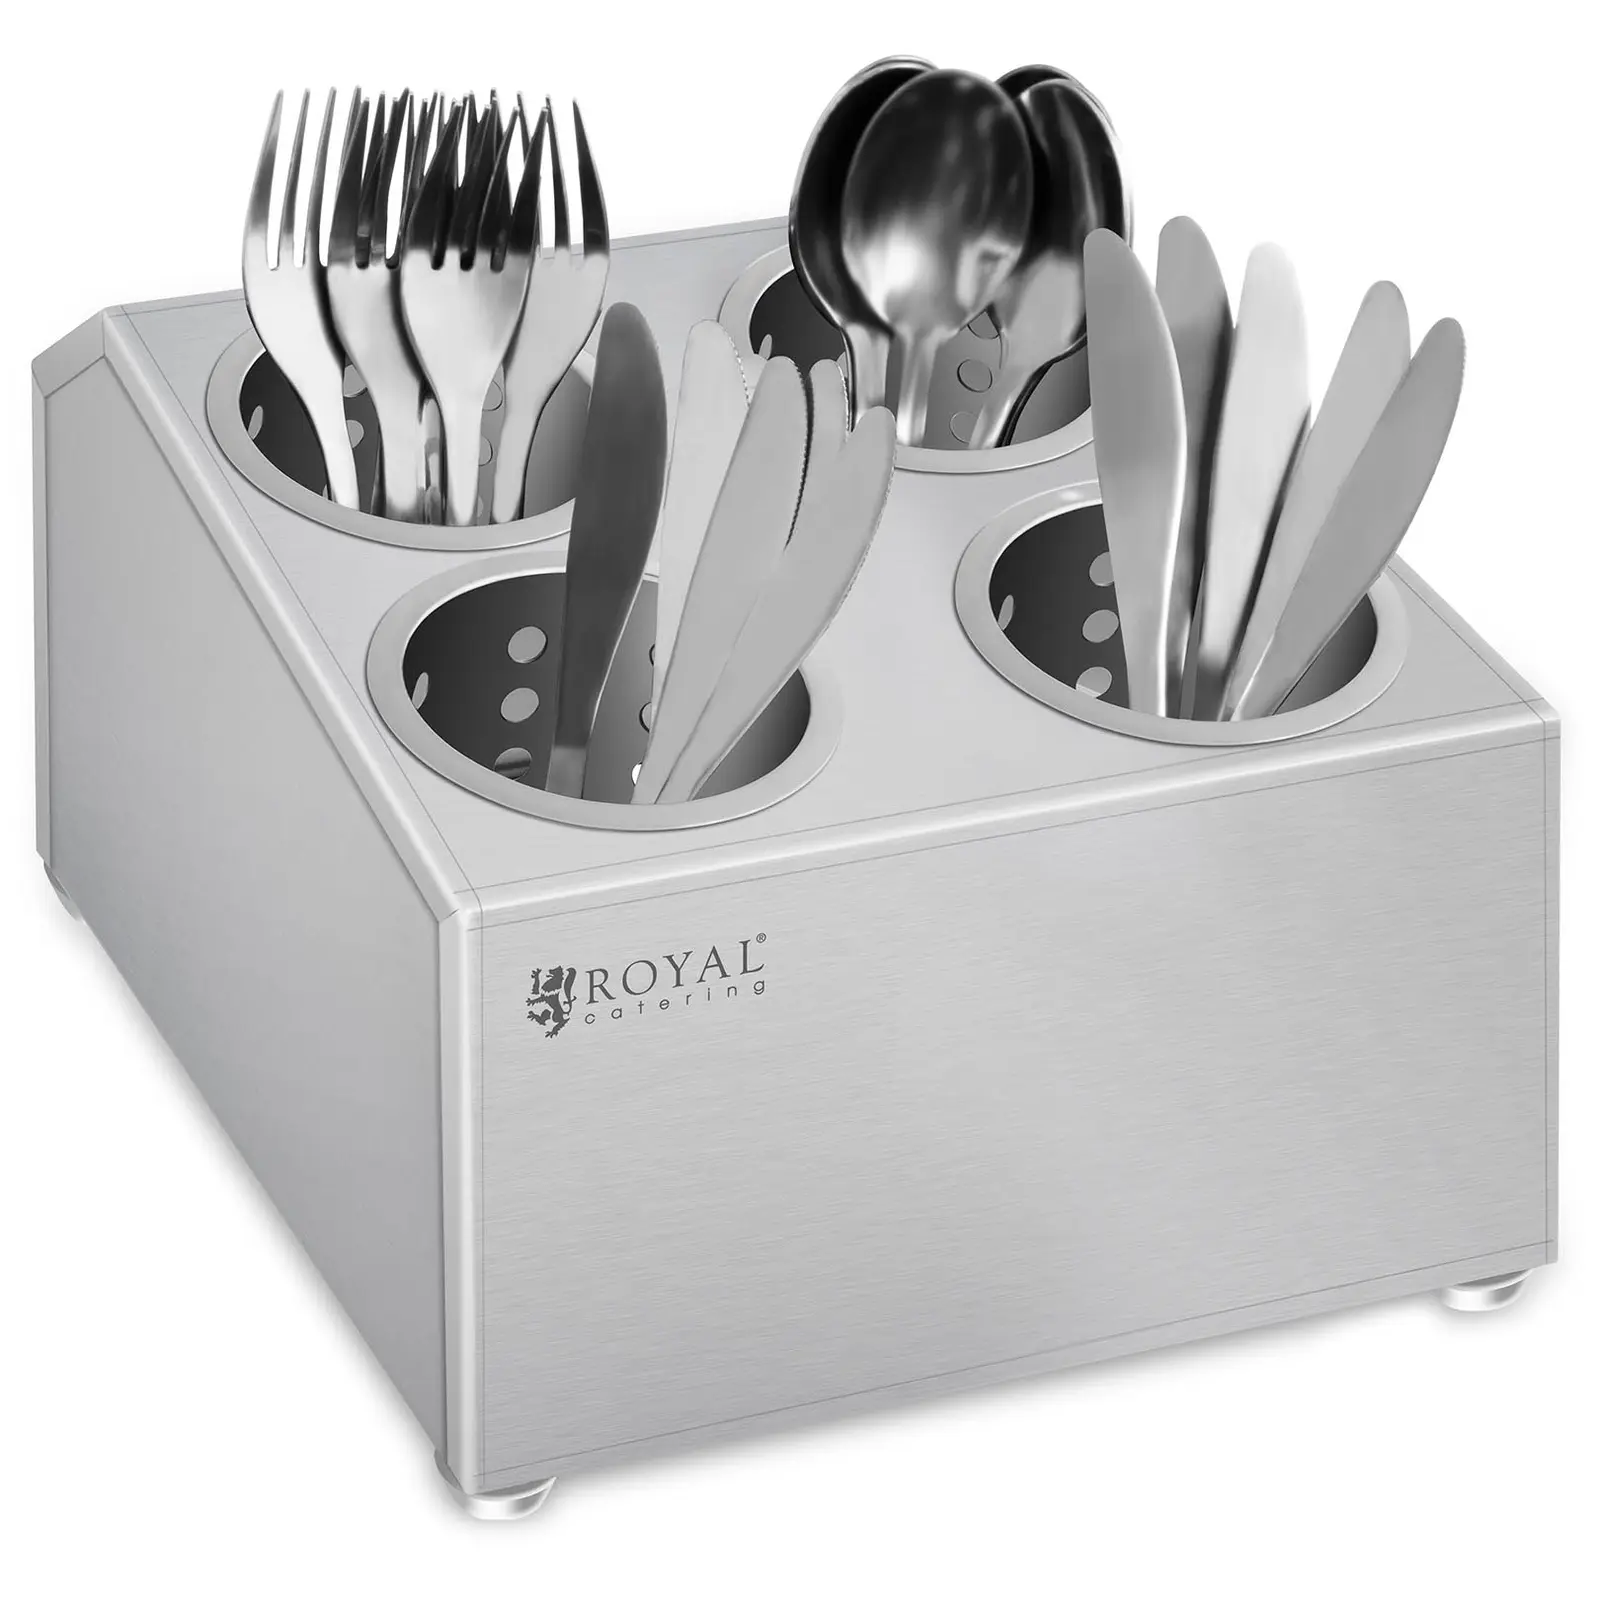 Cutlery container - Stainless steel - With 4 cutlery holders